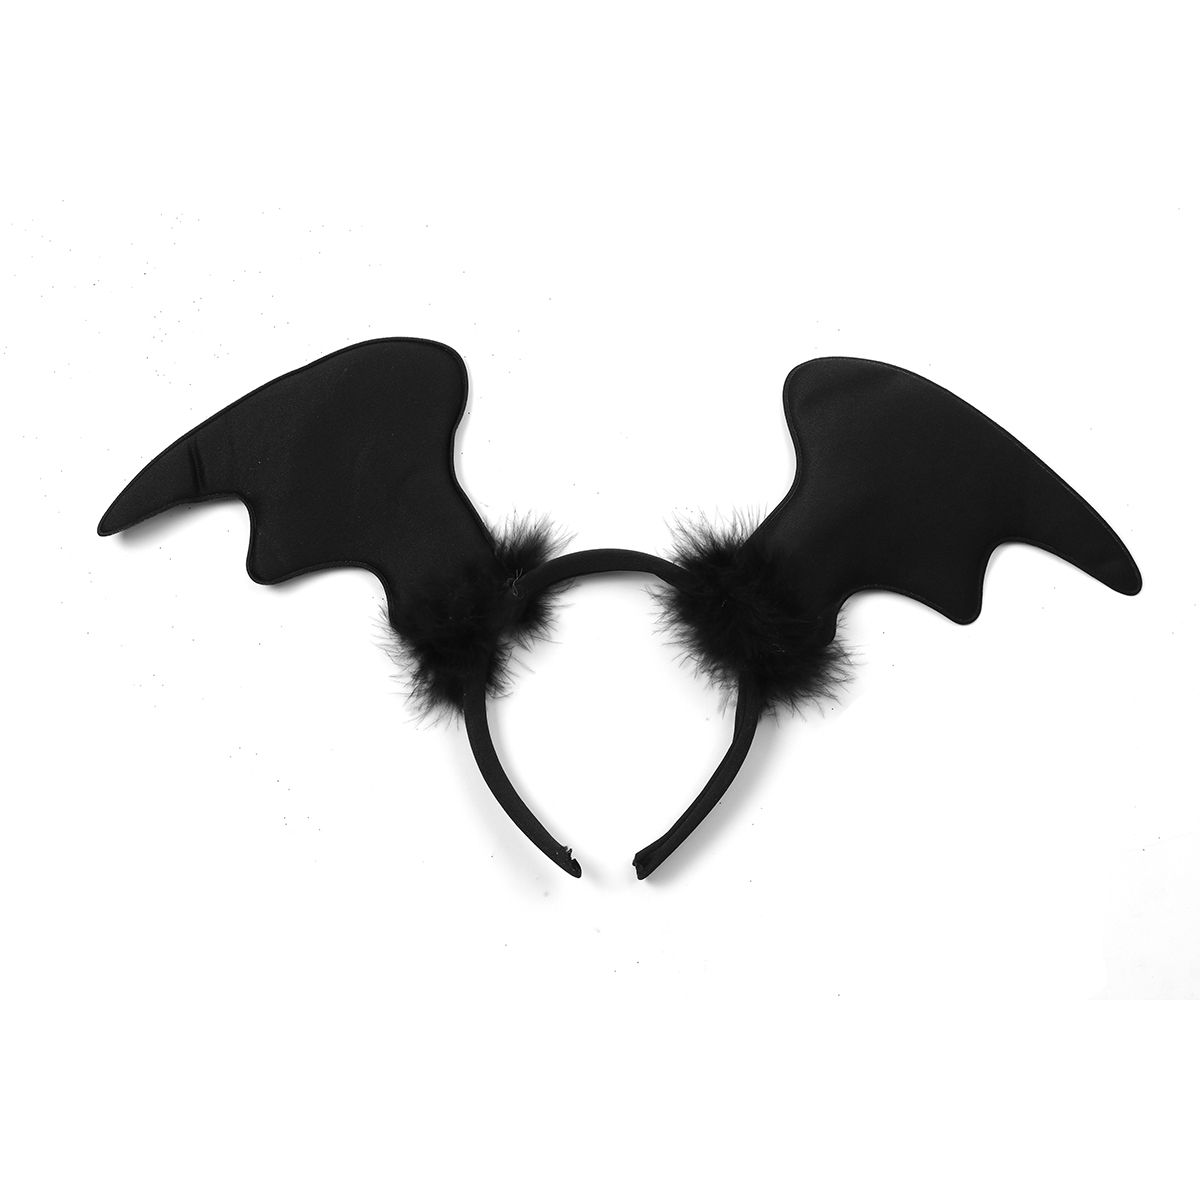 3PCS-Halloween-Decoration-Wings--Hair-Band--Fork-Toys-Cosplay-Halloween-Party-1762472